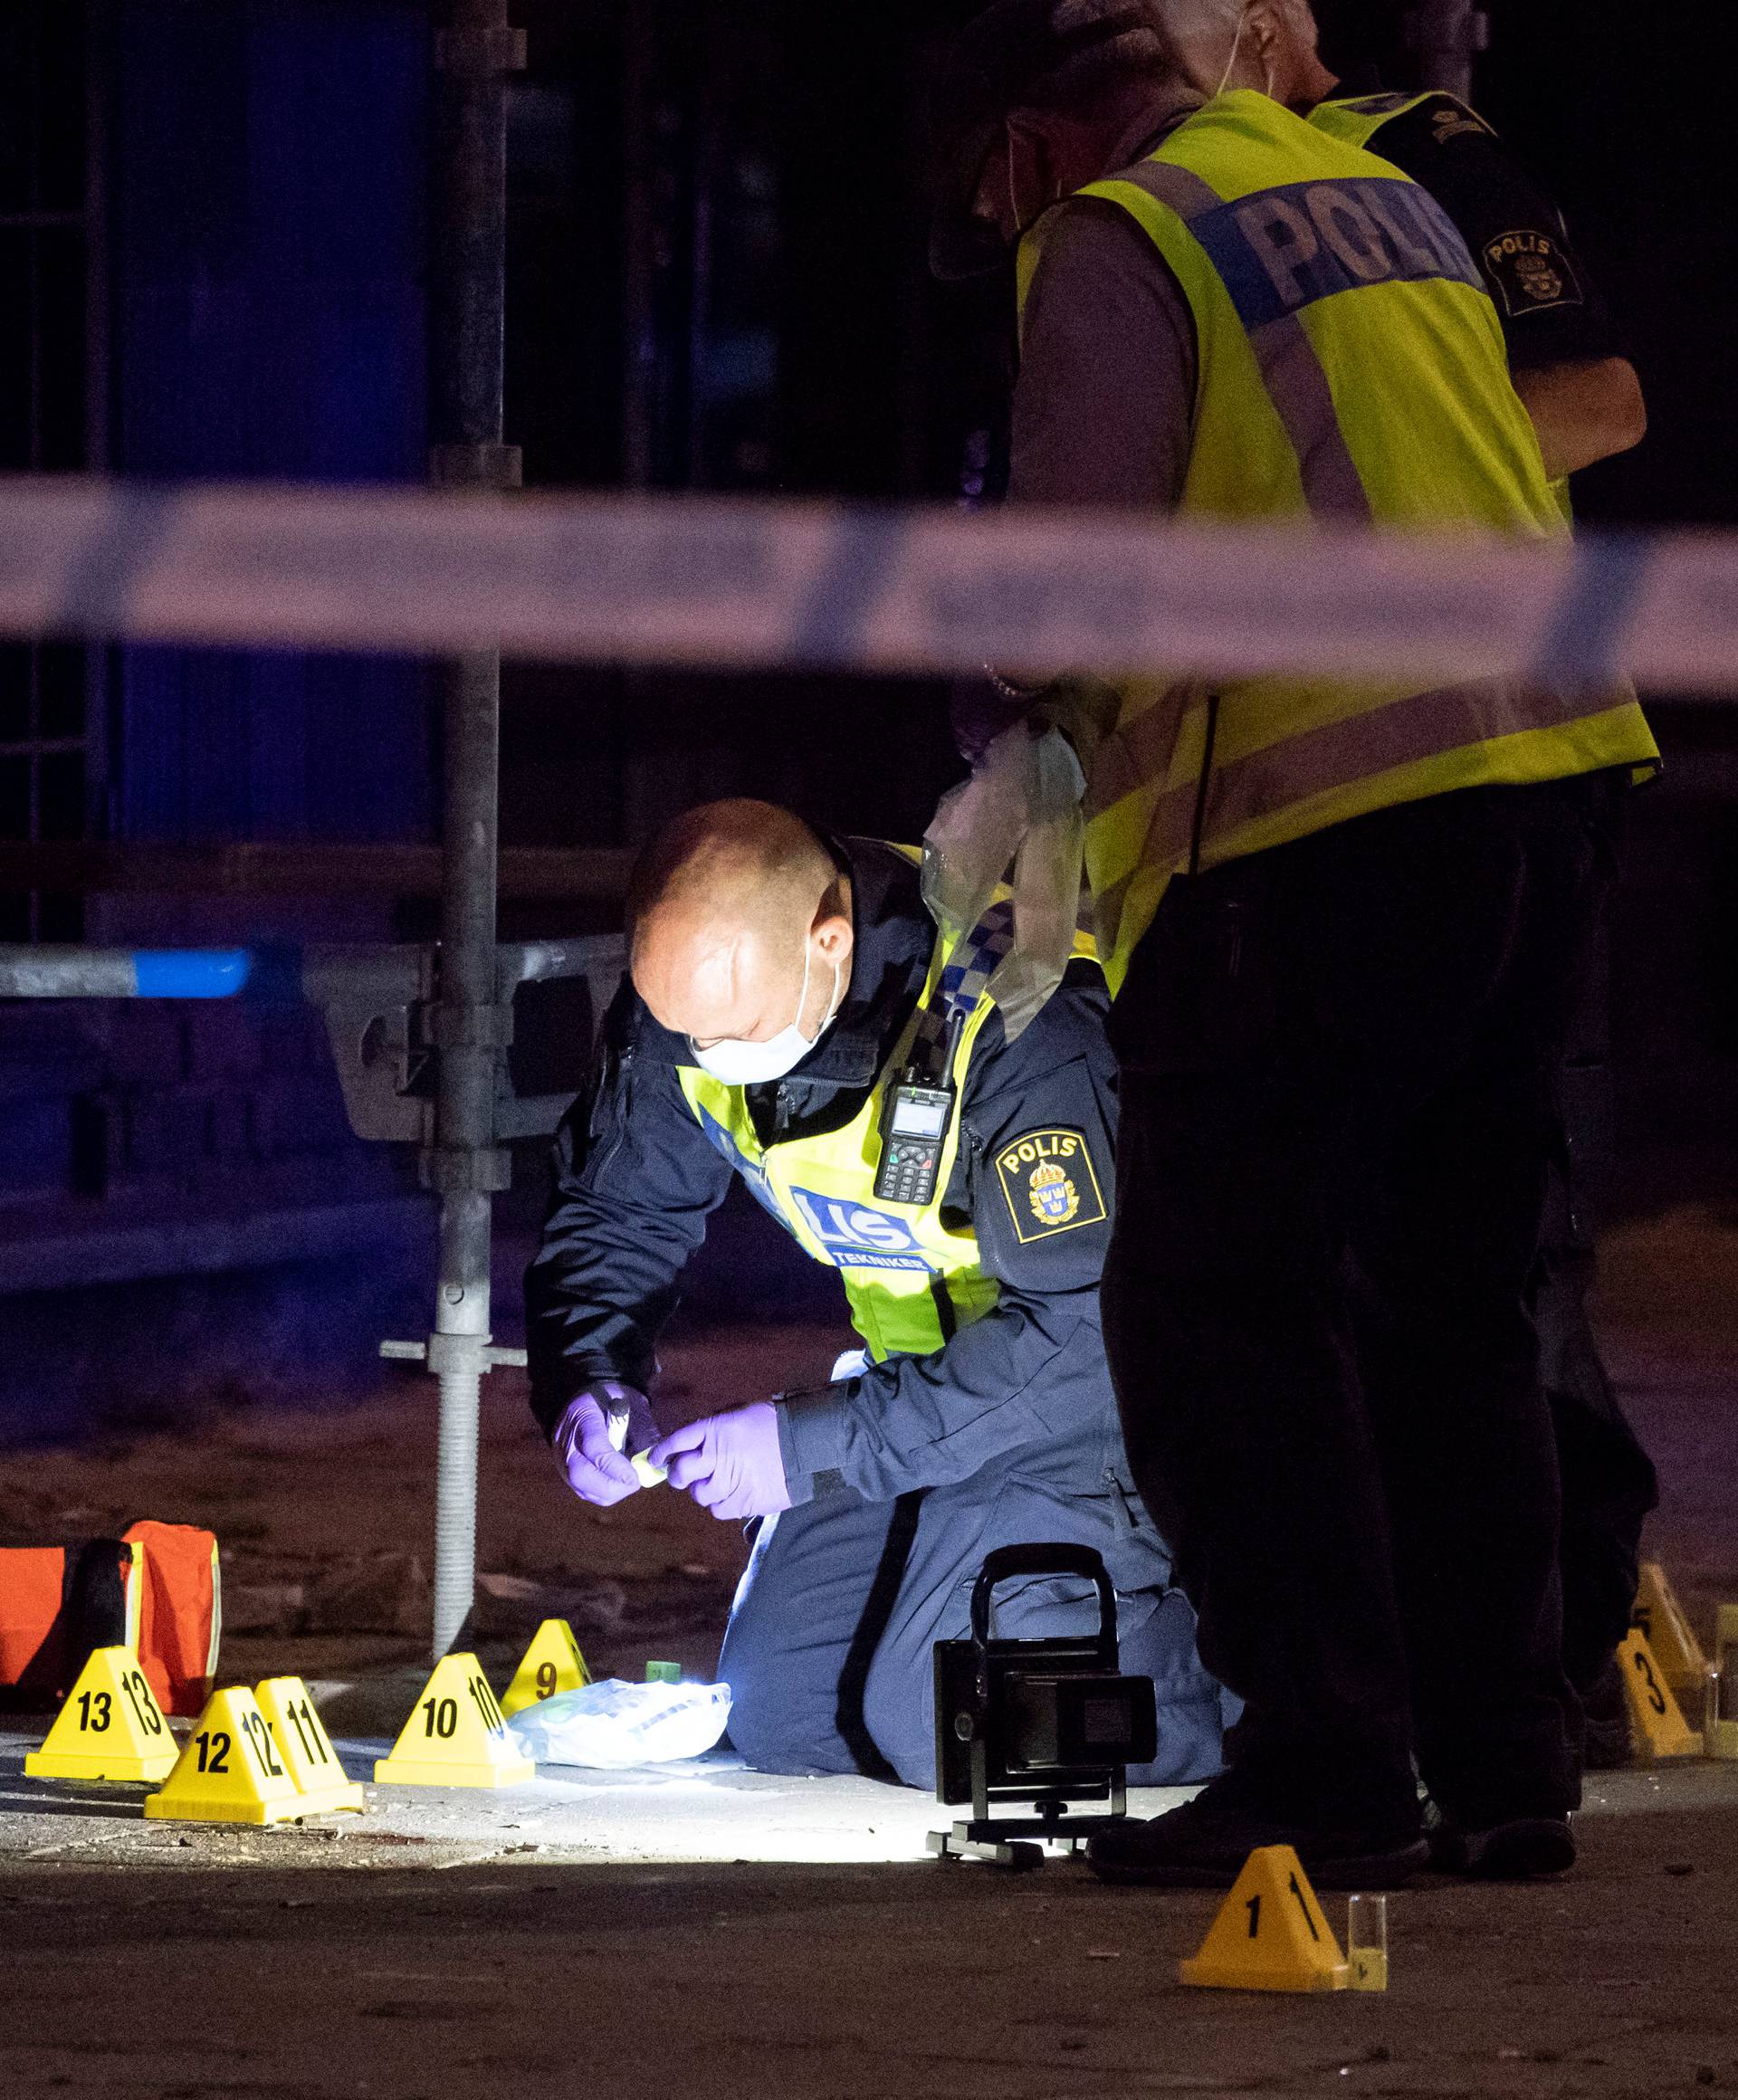 Police forensics investigate the scene after people were shot and injured outside an Internet cafe in central Malmo